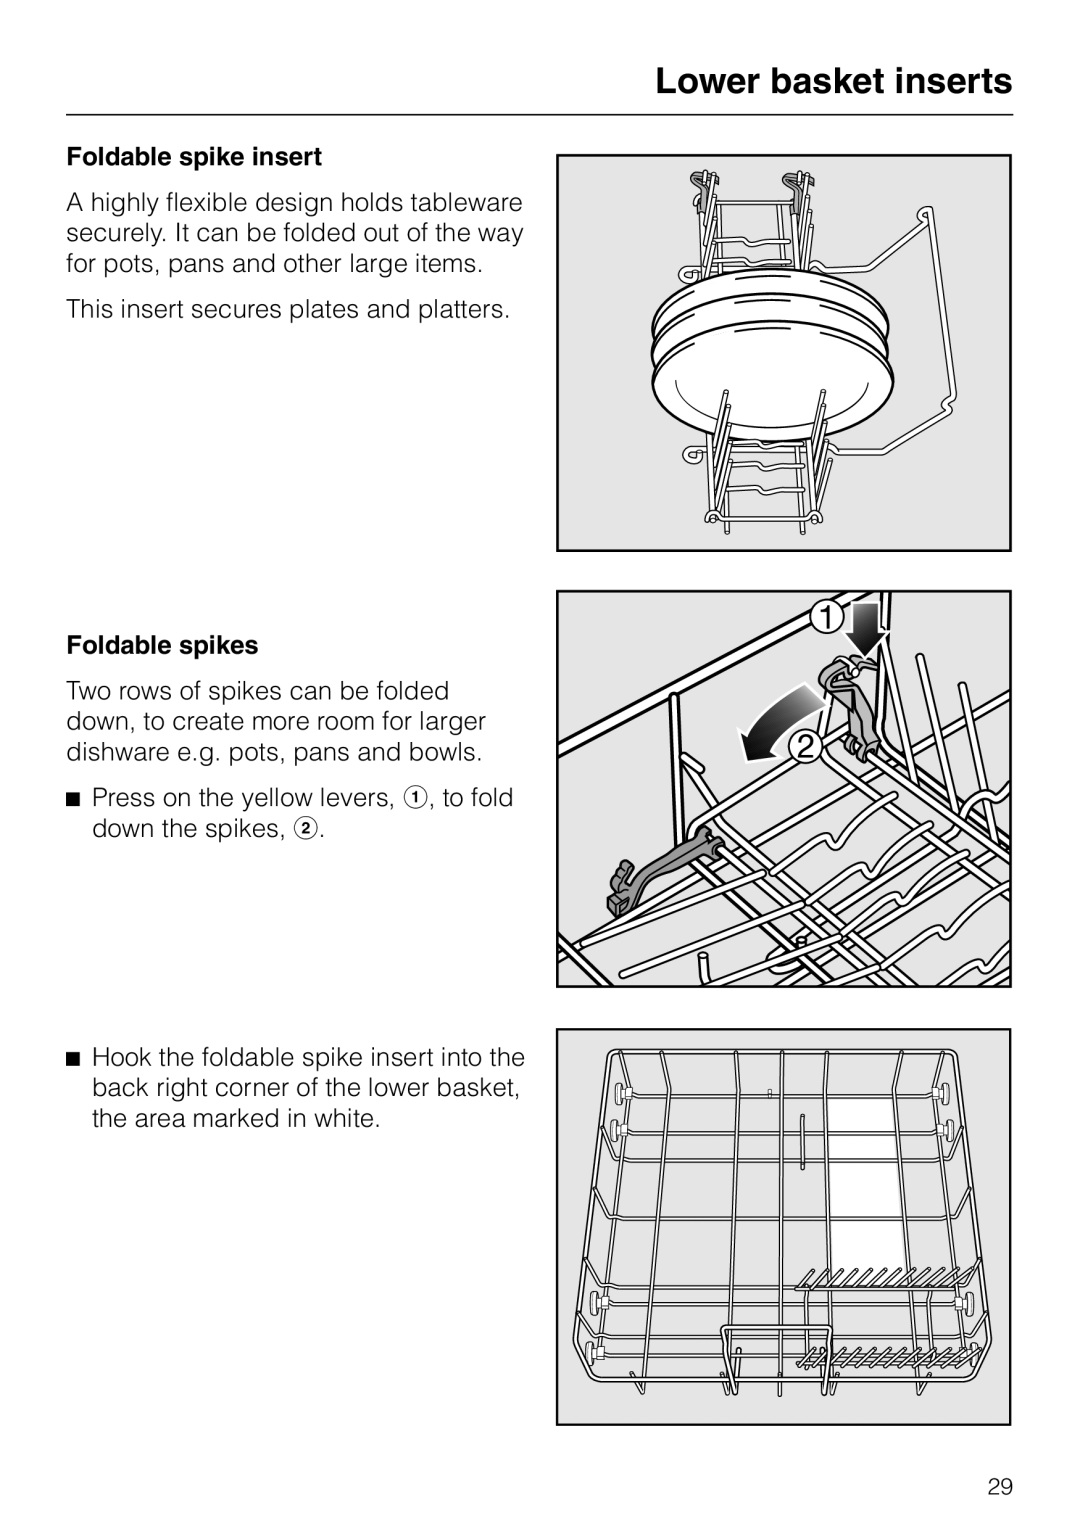 Miele G 851 SC Plus operating instructions Lower basket inserts, Foldable spike insert, Foldable spikes 